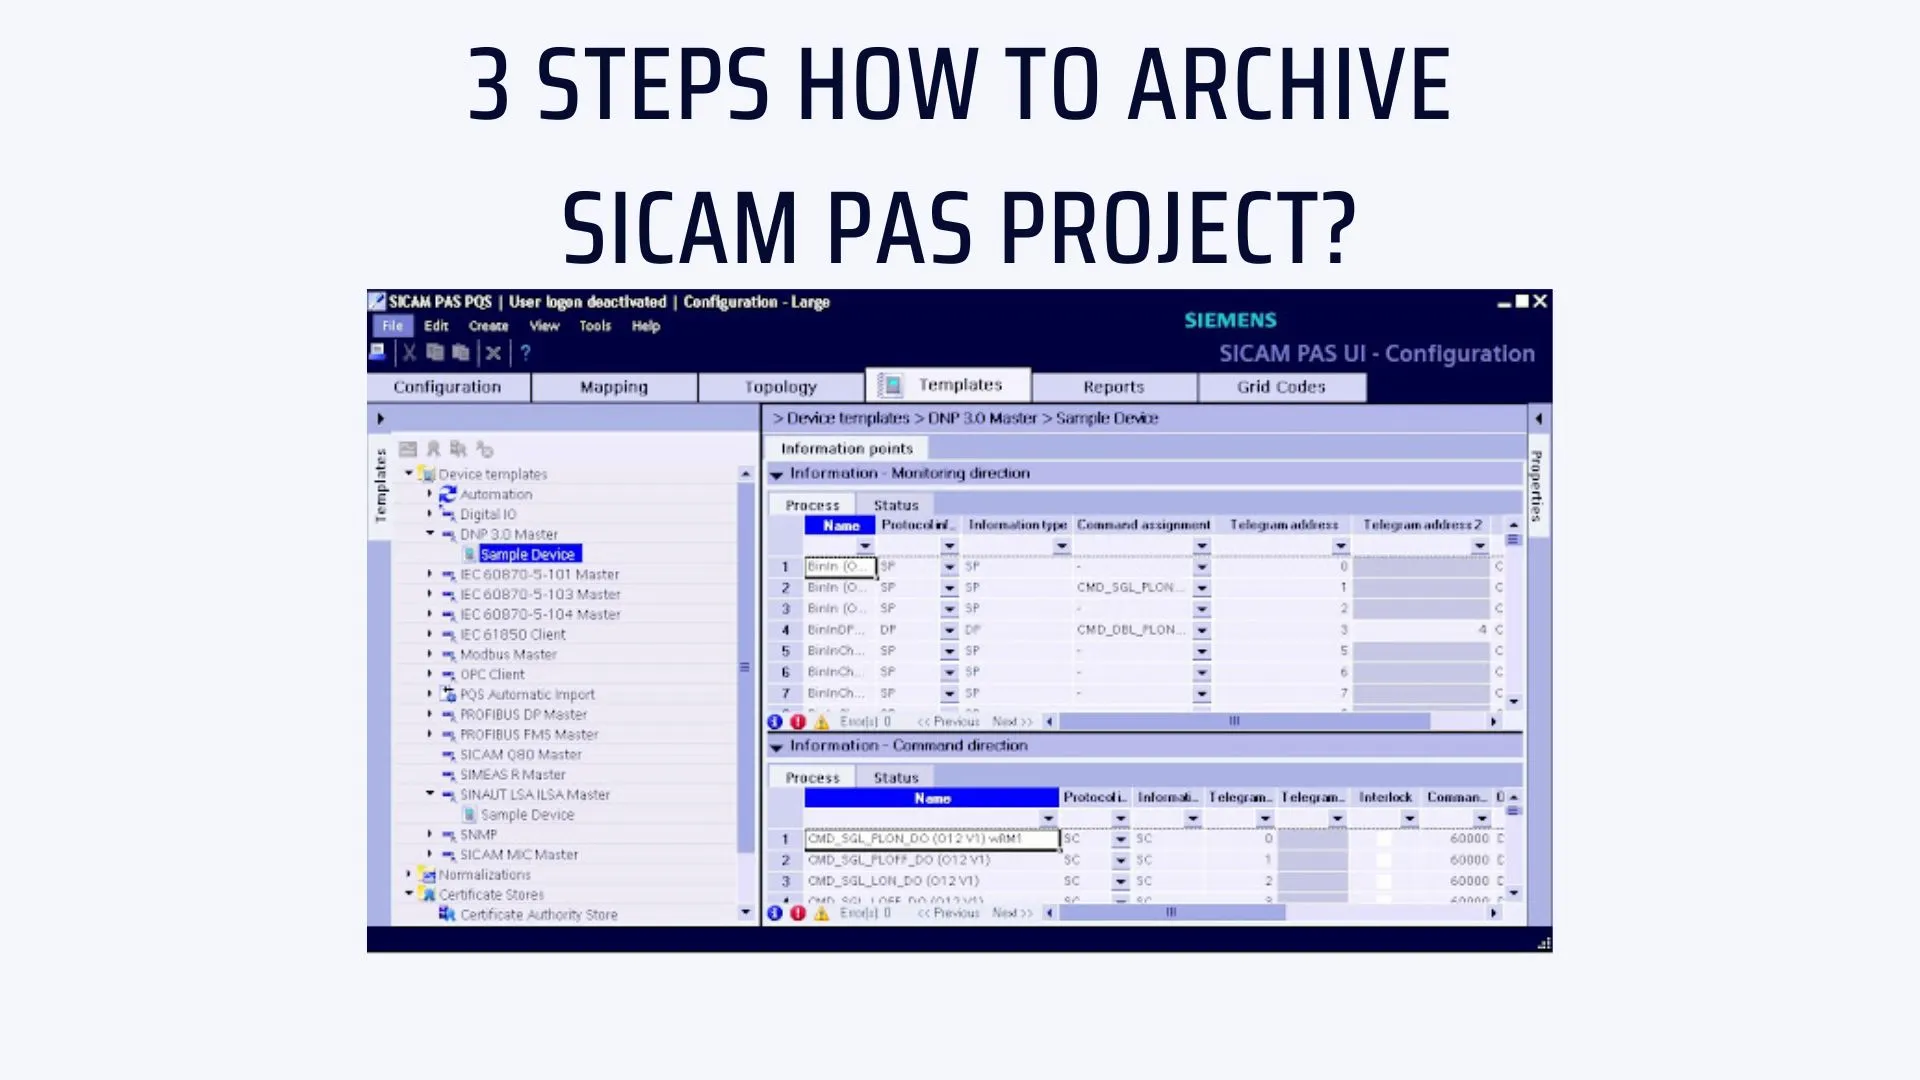 3 Steps How to Archive SICAM PAS Project